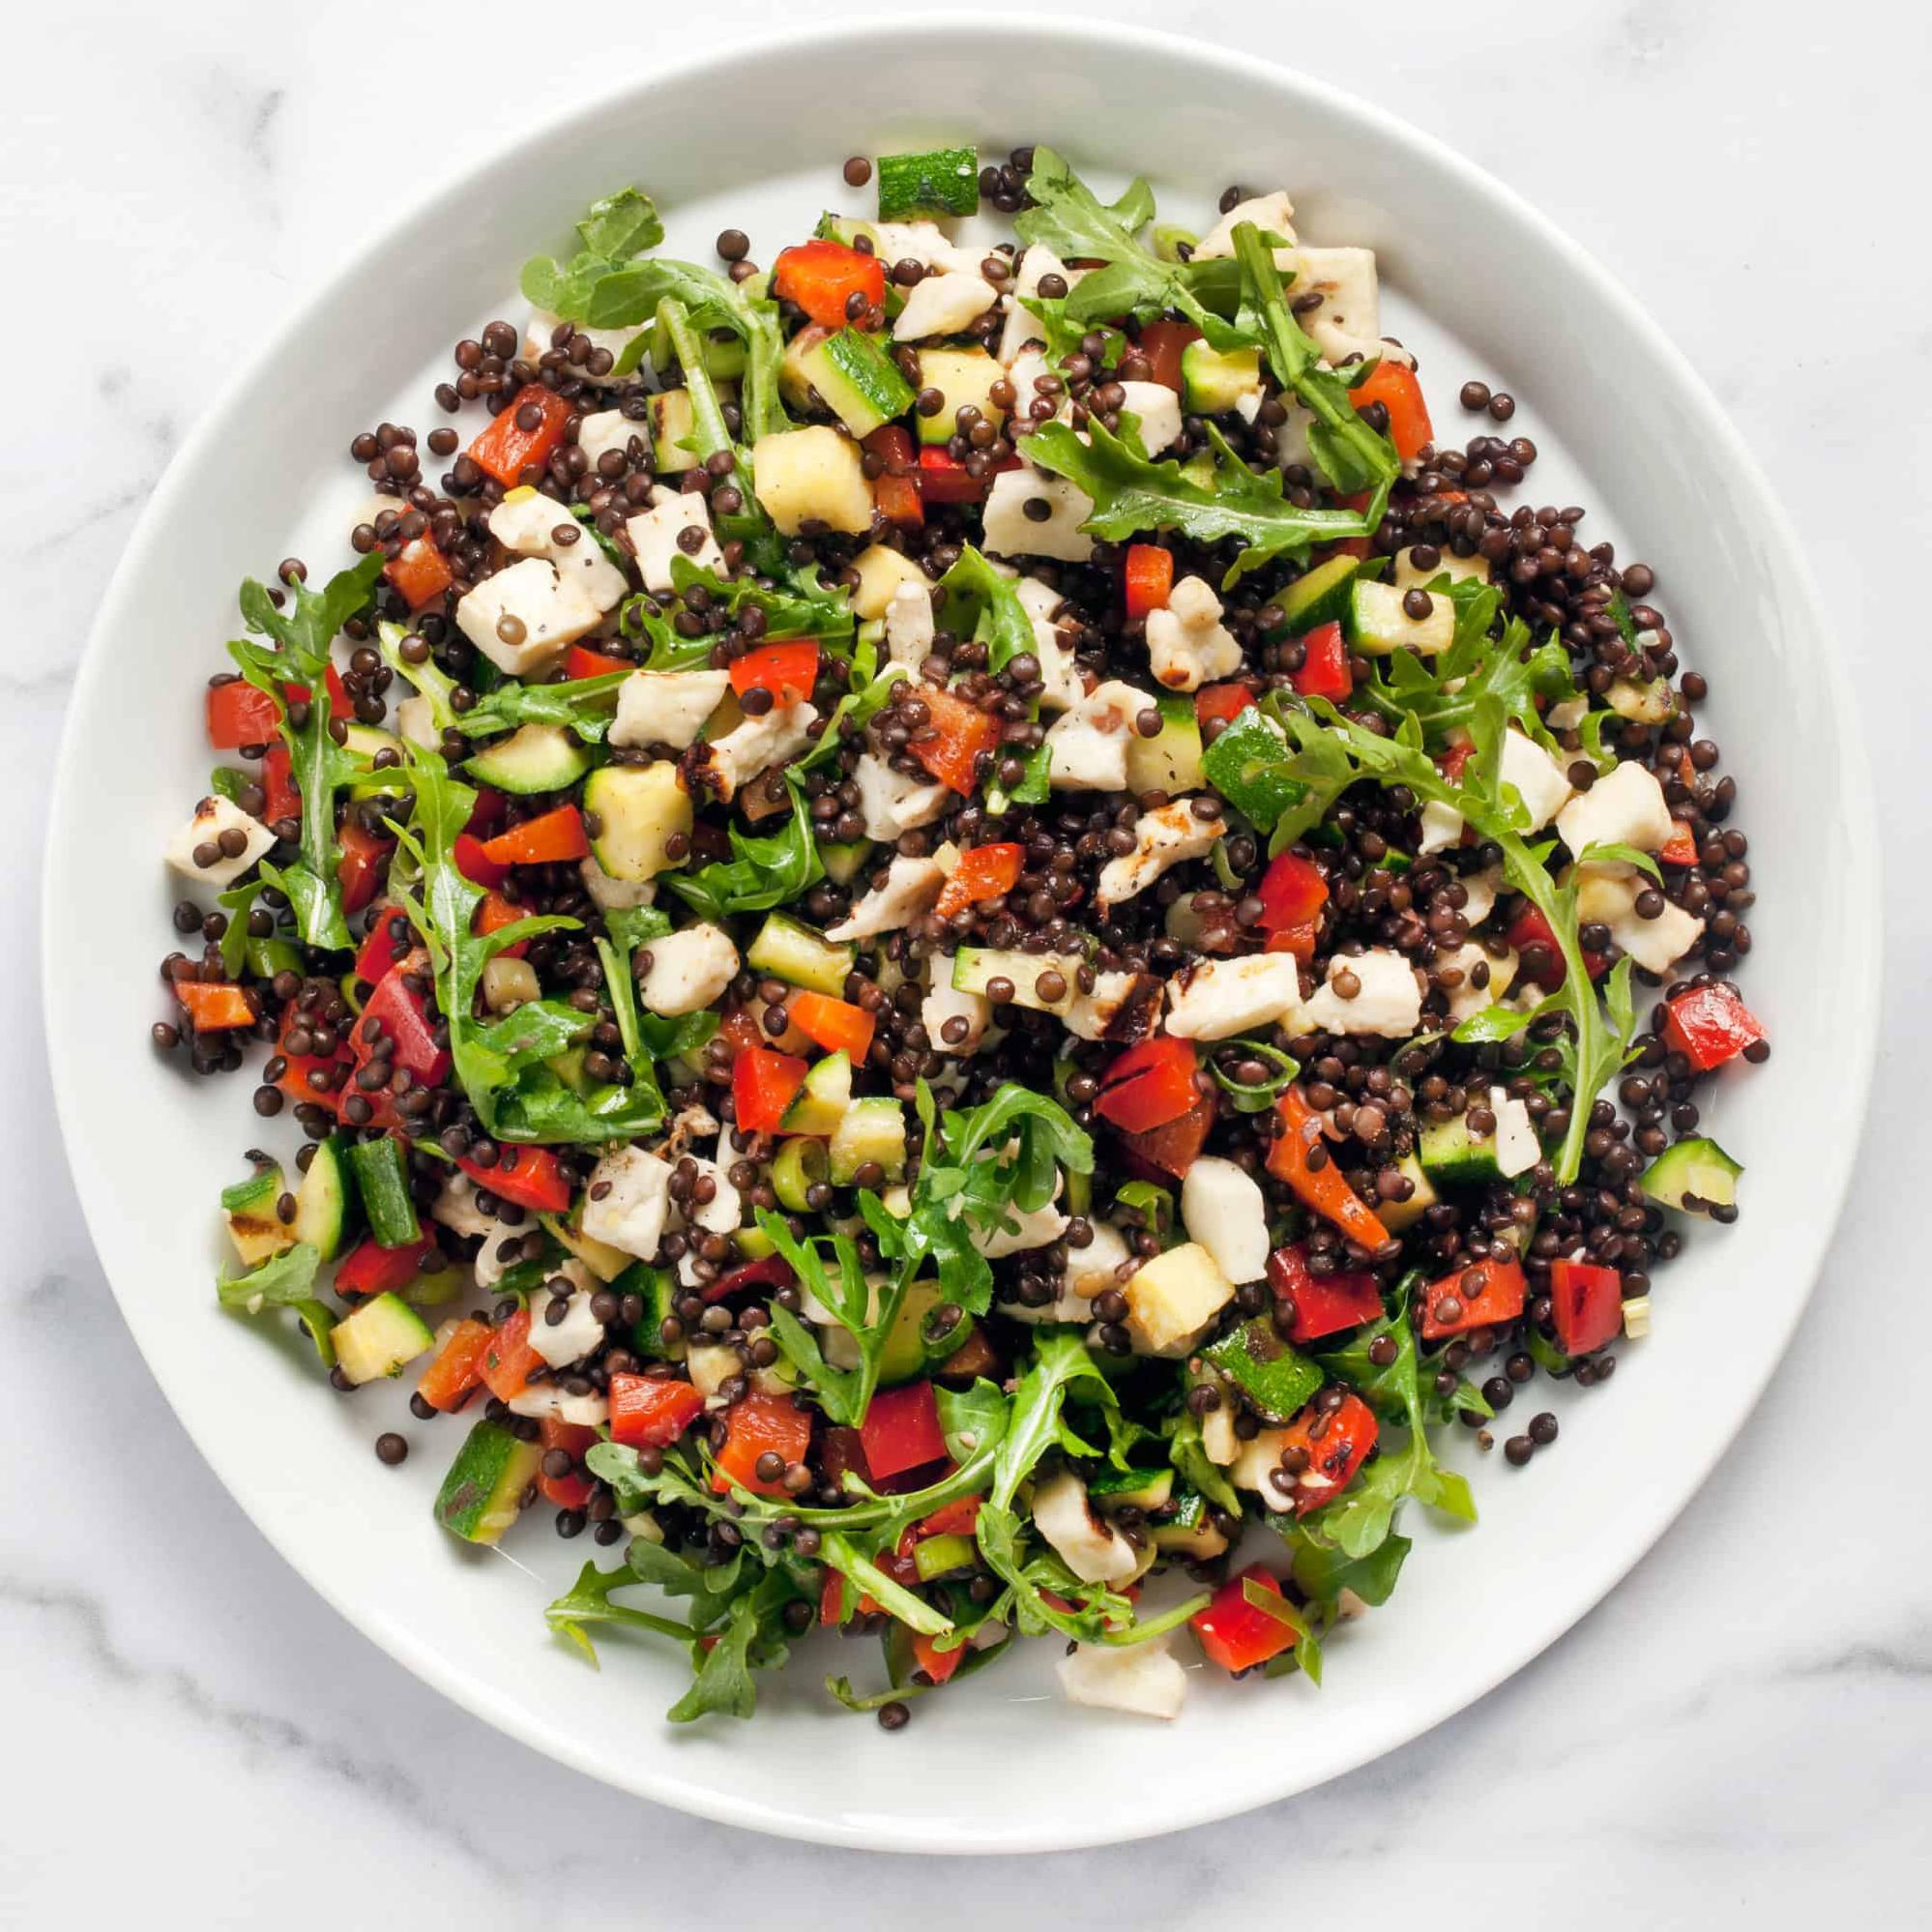  This mild, fresh, and earthy flavored salad will impress your guests and make for